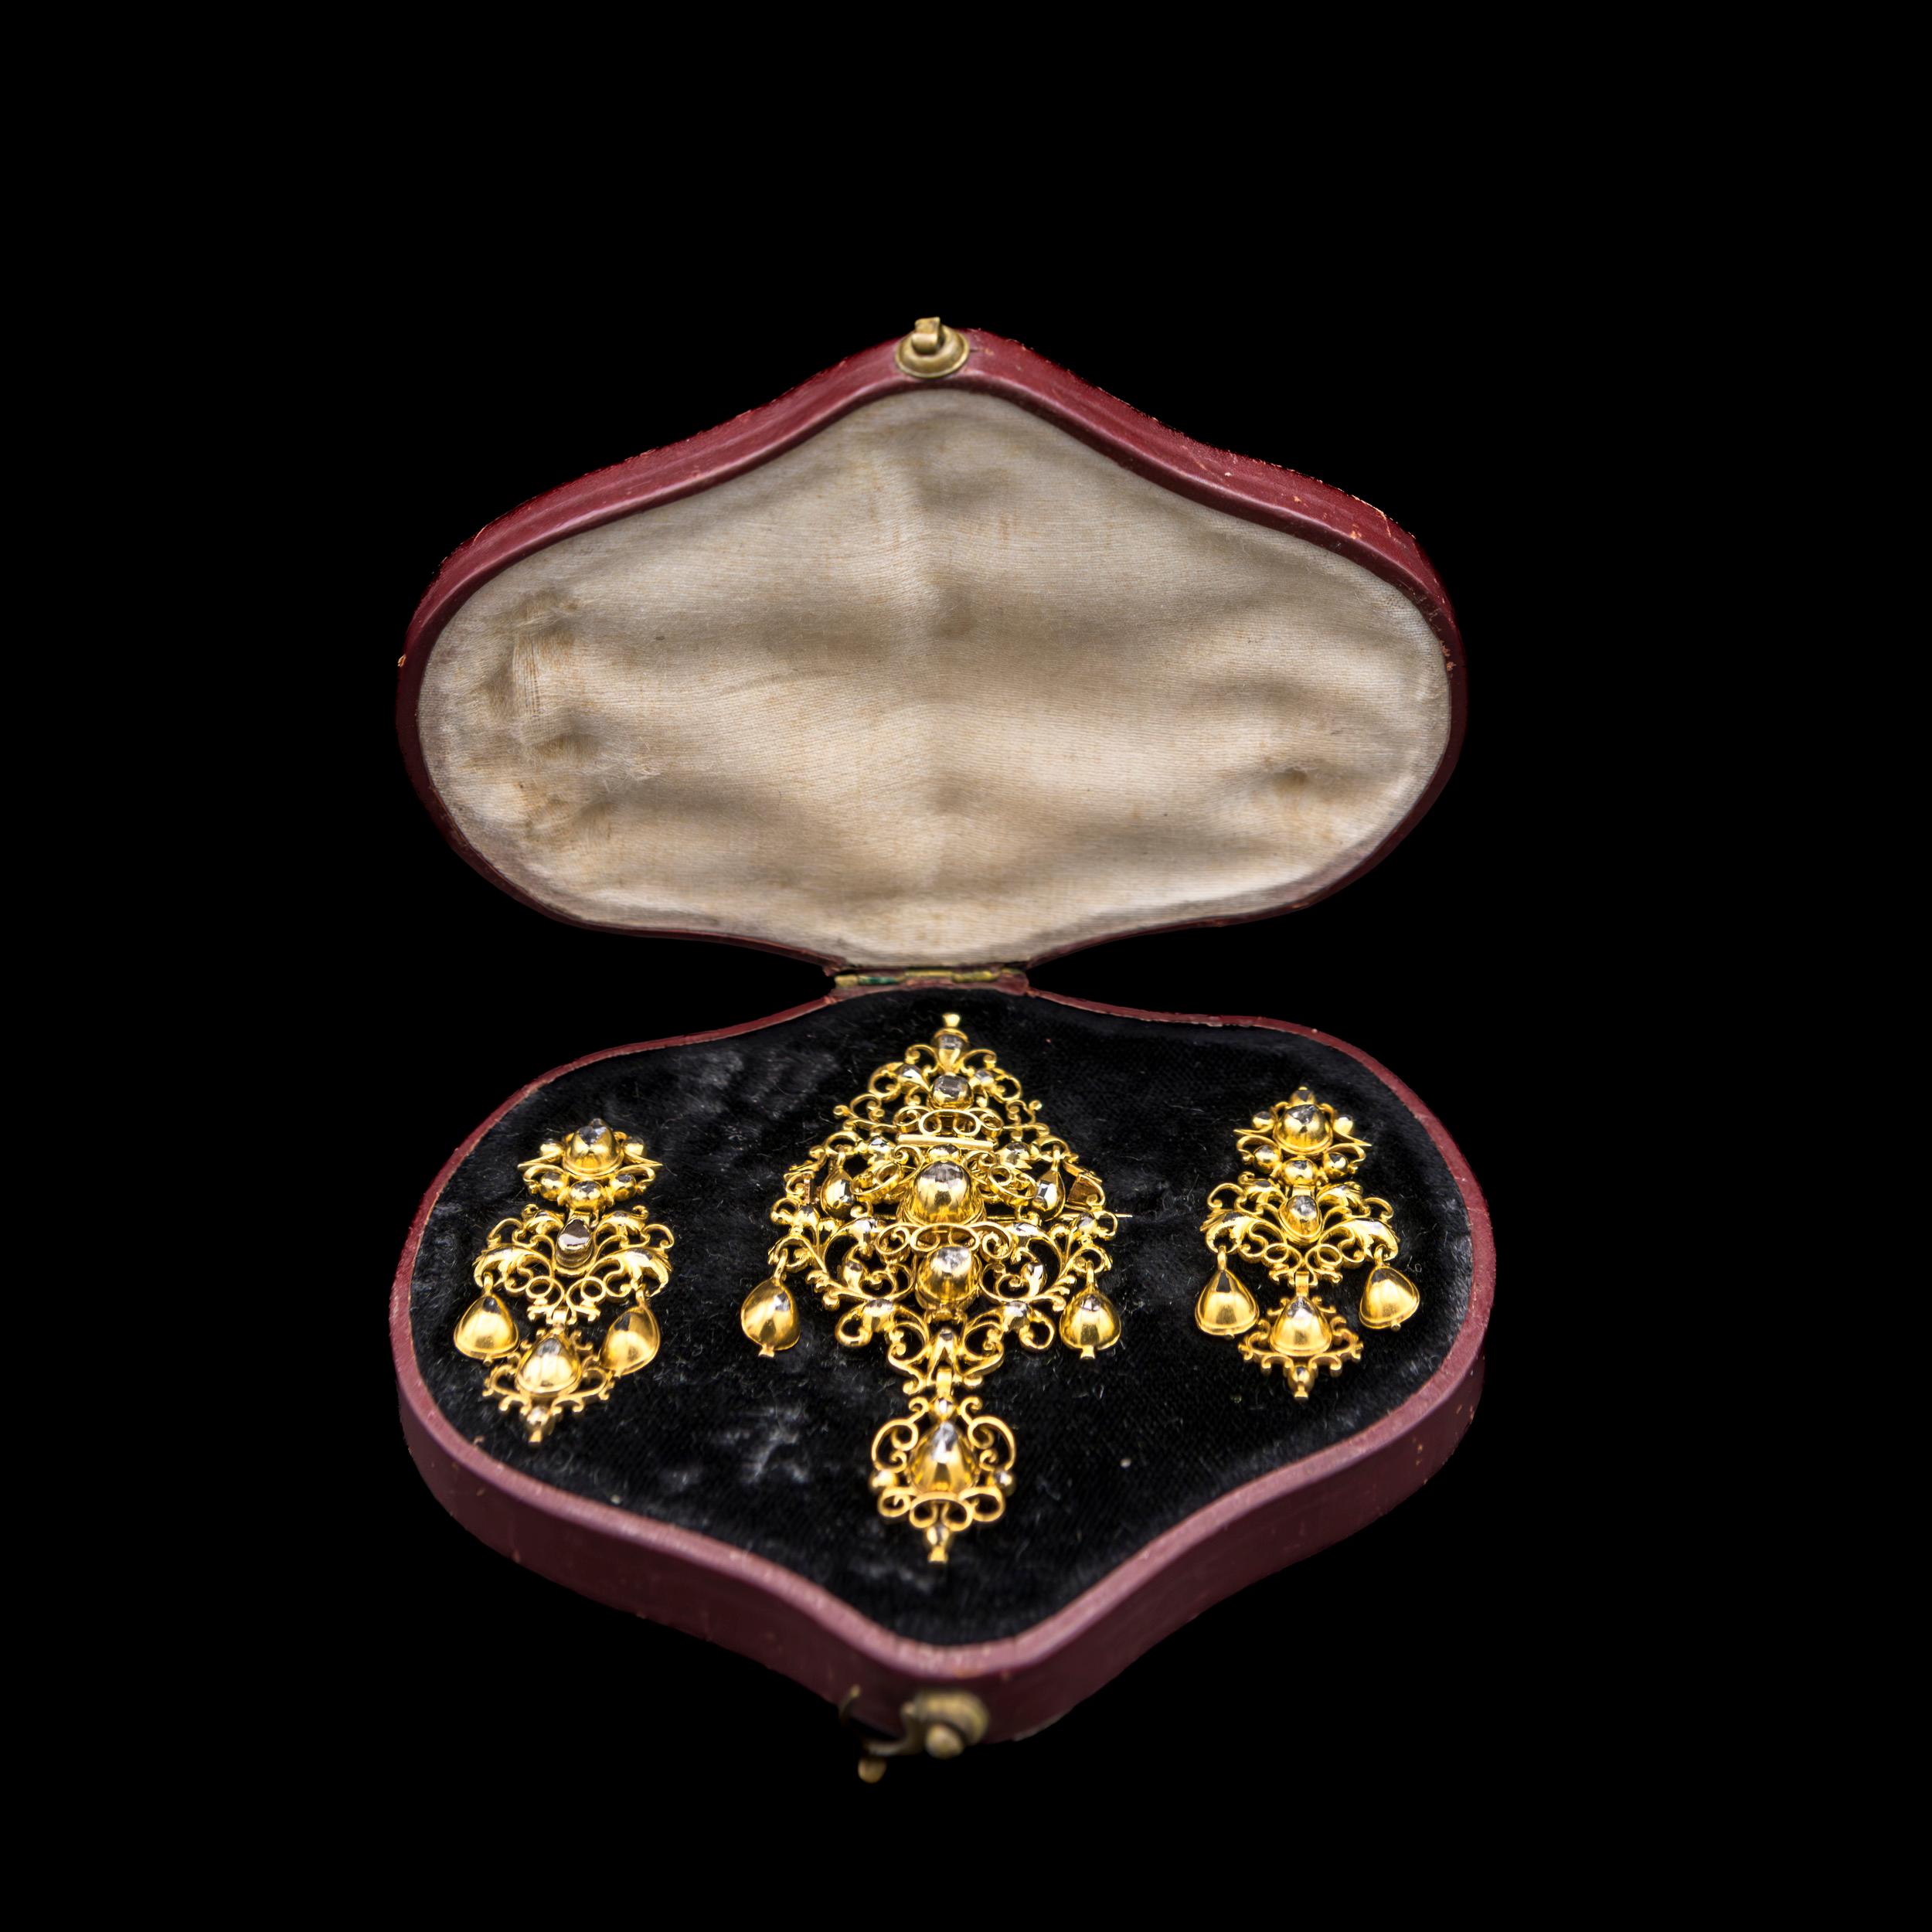 Museum-quality antique late 17th/early 18th century diamond and yellow gold Baroque “sequilé” earrings and pendant/brooch demi-parure, Portuguese, with hallmarks from the period and in the original case. This Georgian sequilé jewel from the first